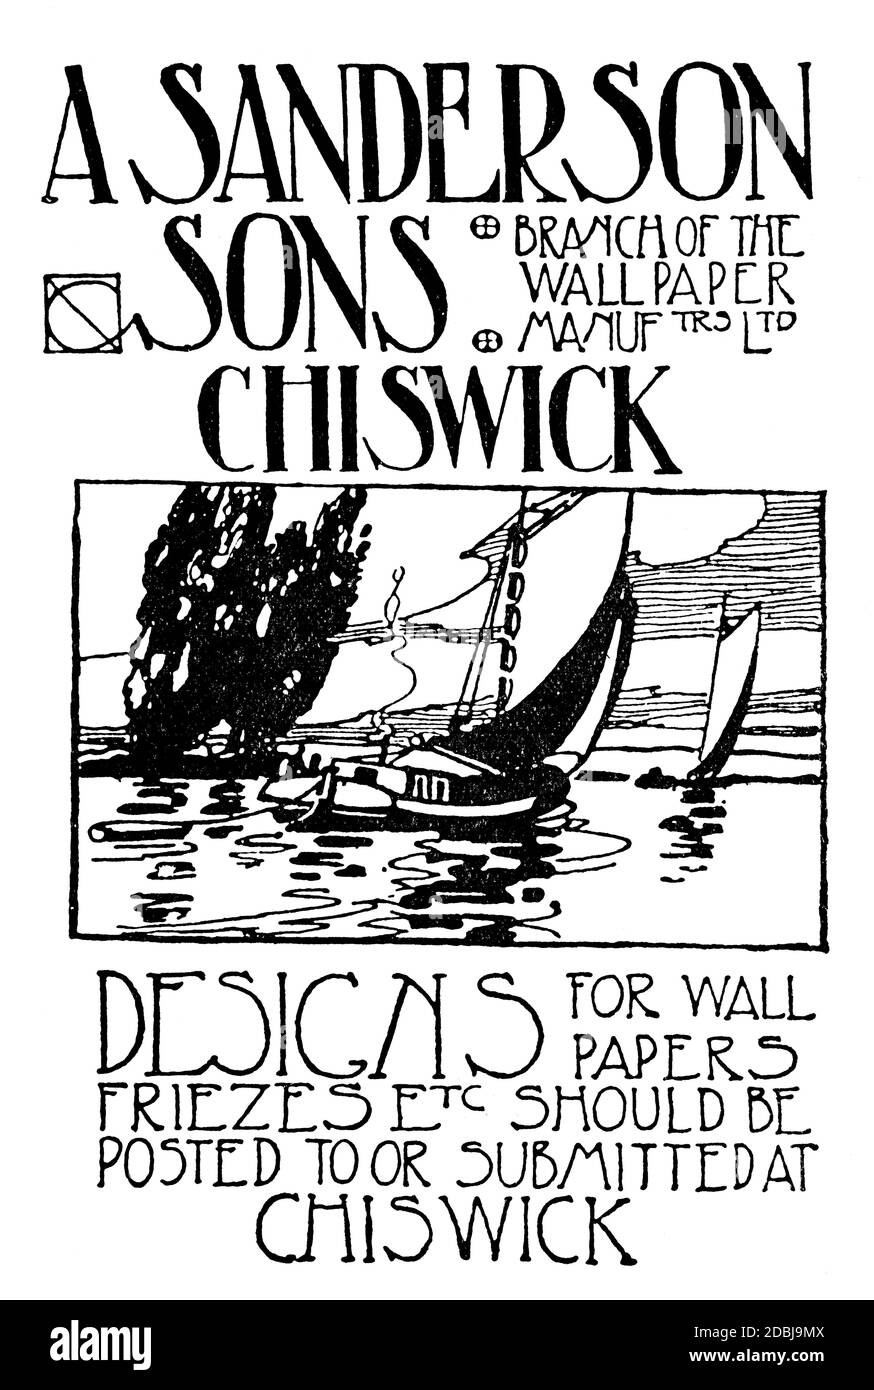 hand drawn sailing boat design advertisement for A Sanderson & Sons, wallpaper manufacturers of Chiswick, London from 1912 The Studio an Illustrated M Stock Photo